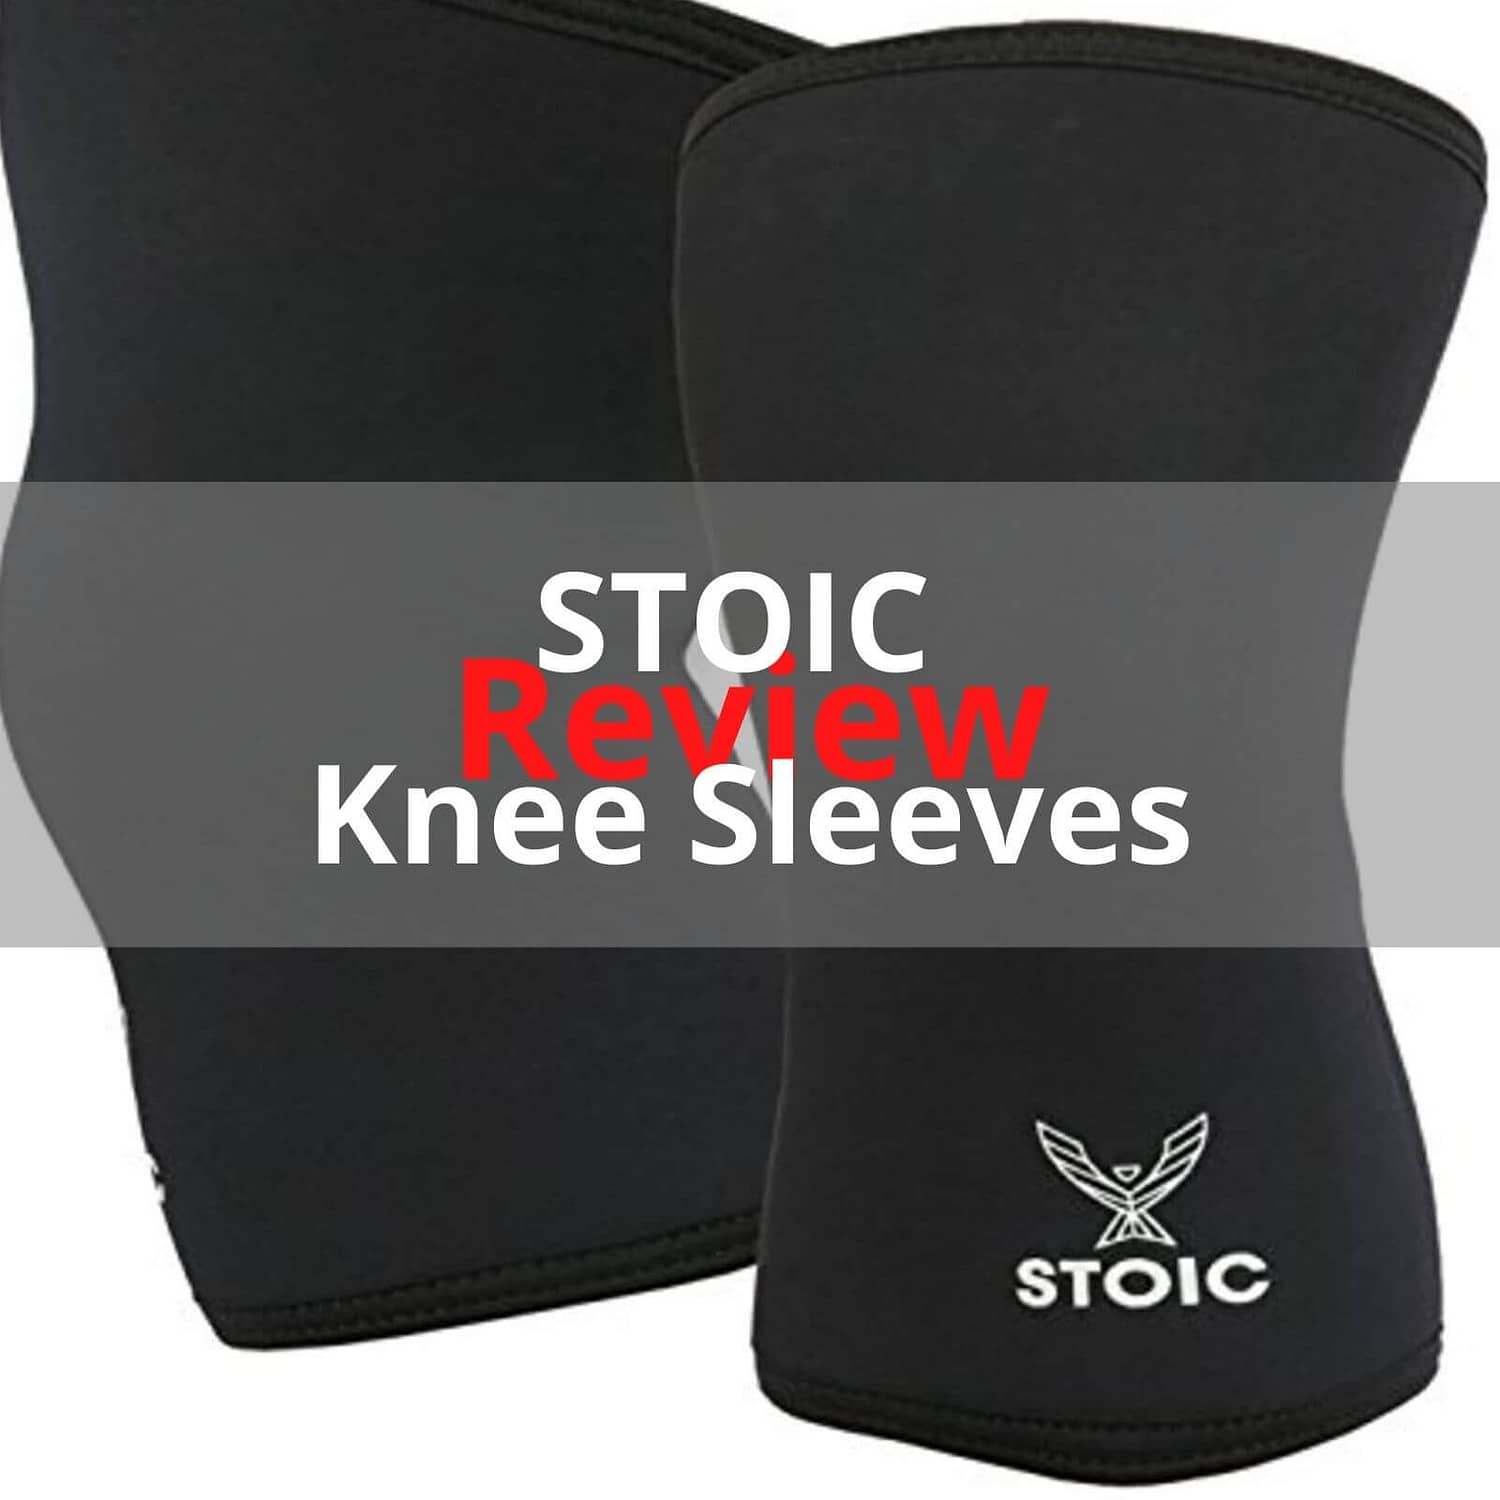 Stoic Knee Sleeves Review ◙ 7MM Performance